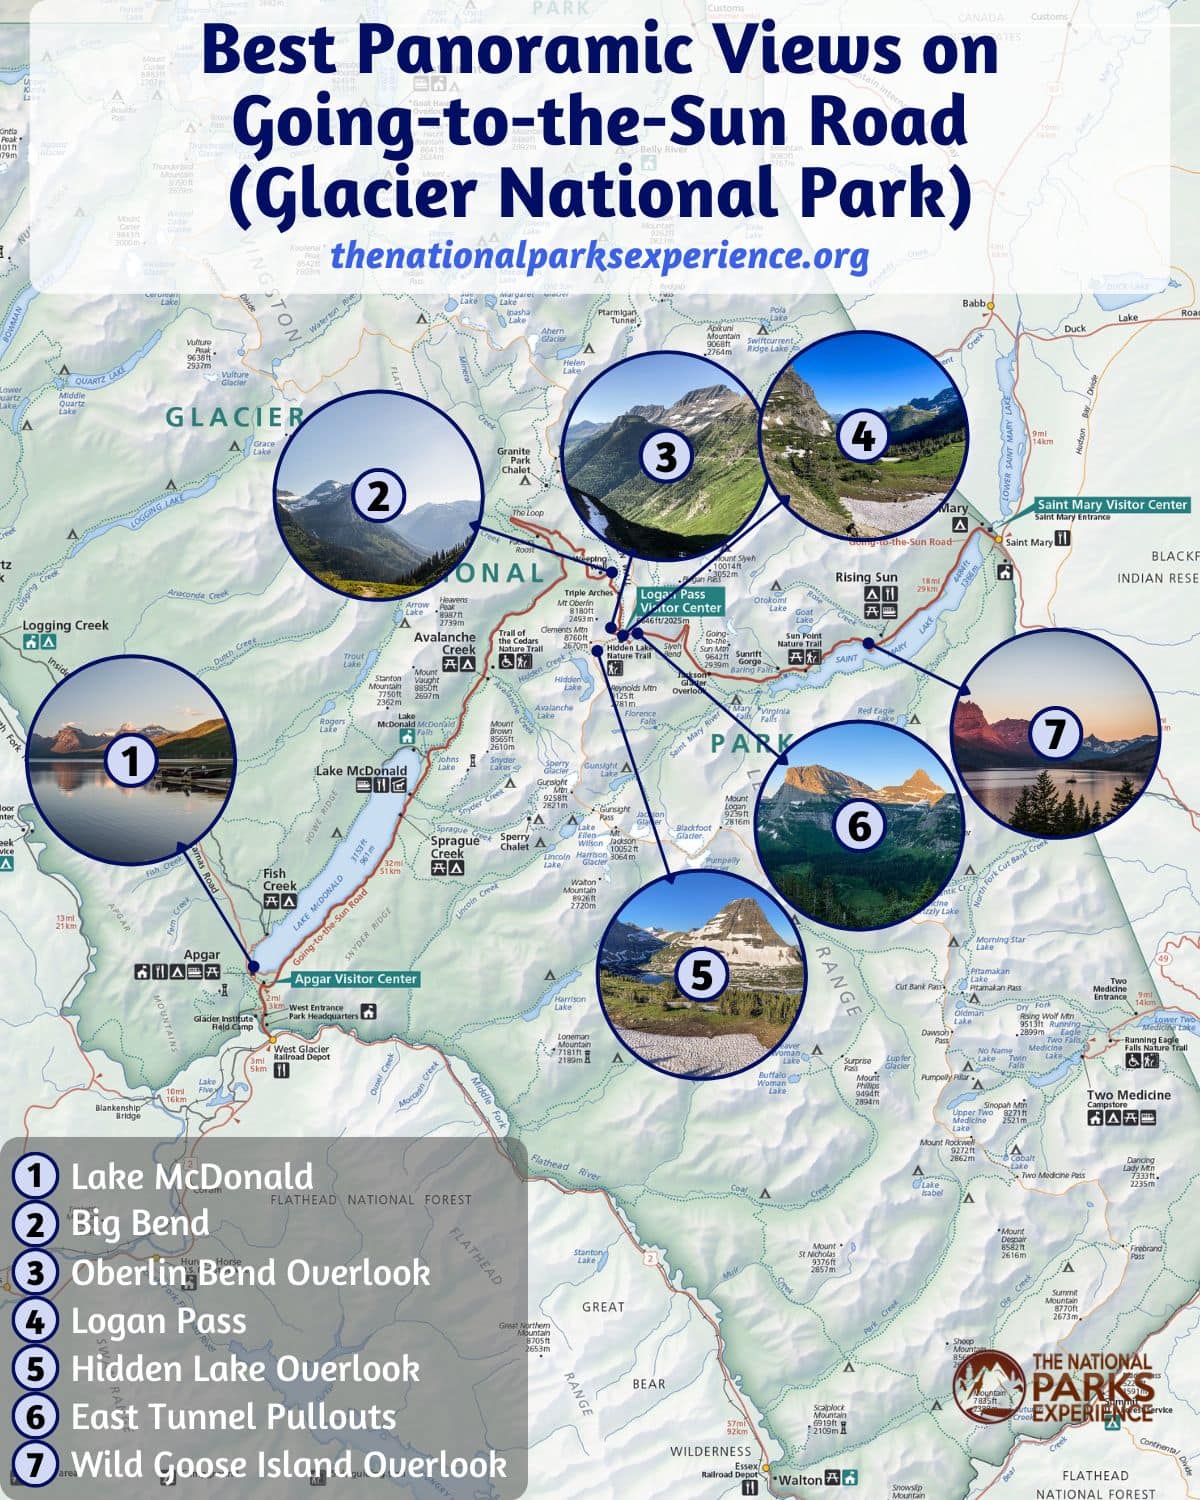 Best Panoramic Views on Going-to-the-Sun Road, Glacier National Park Map